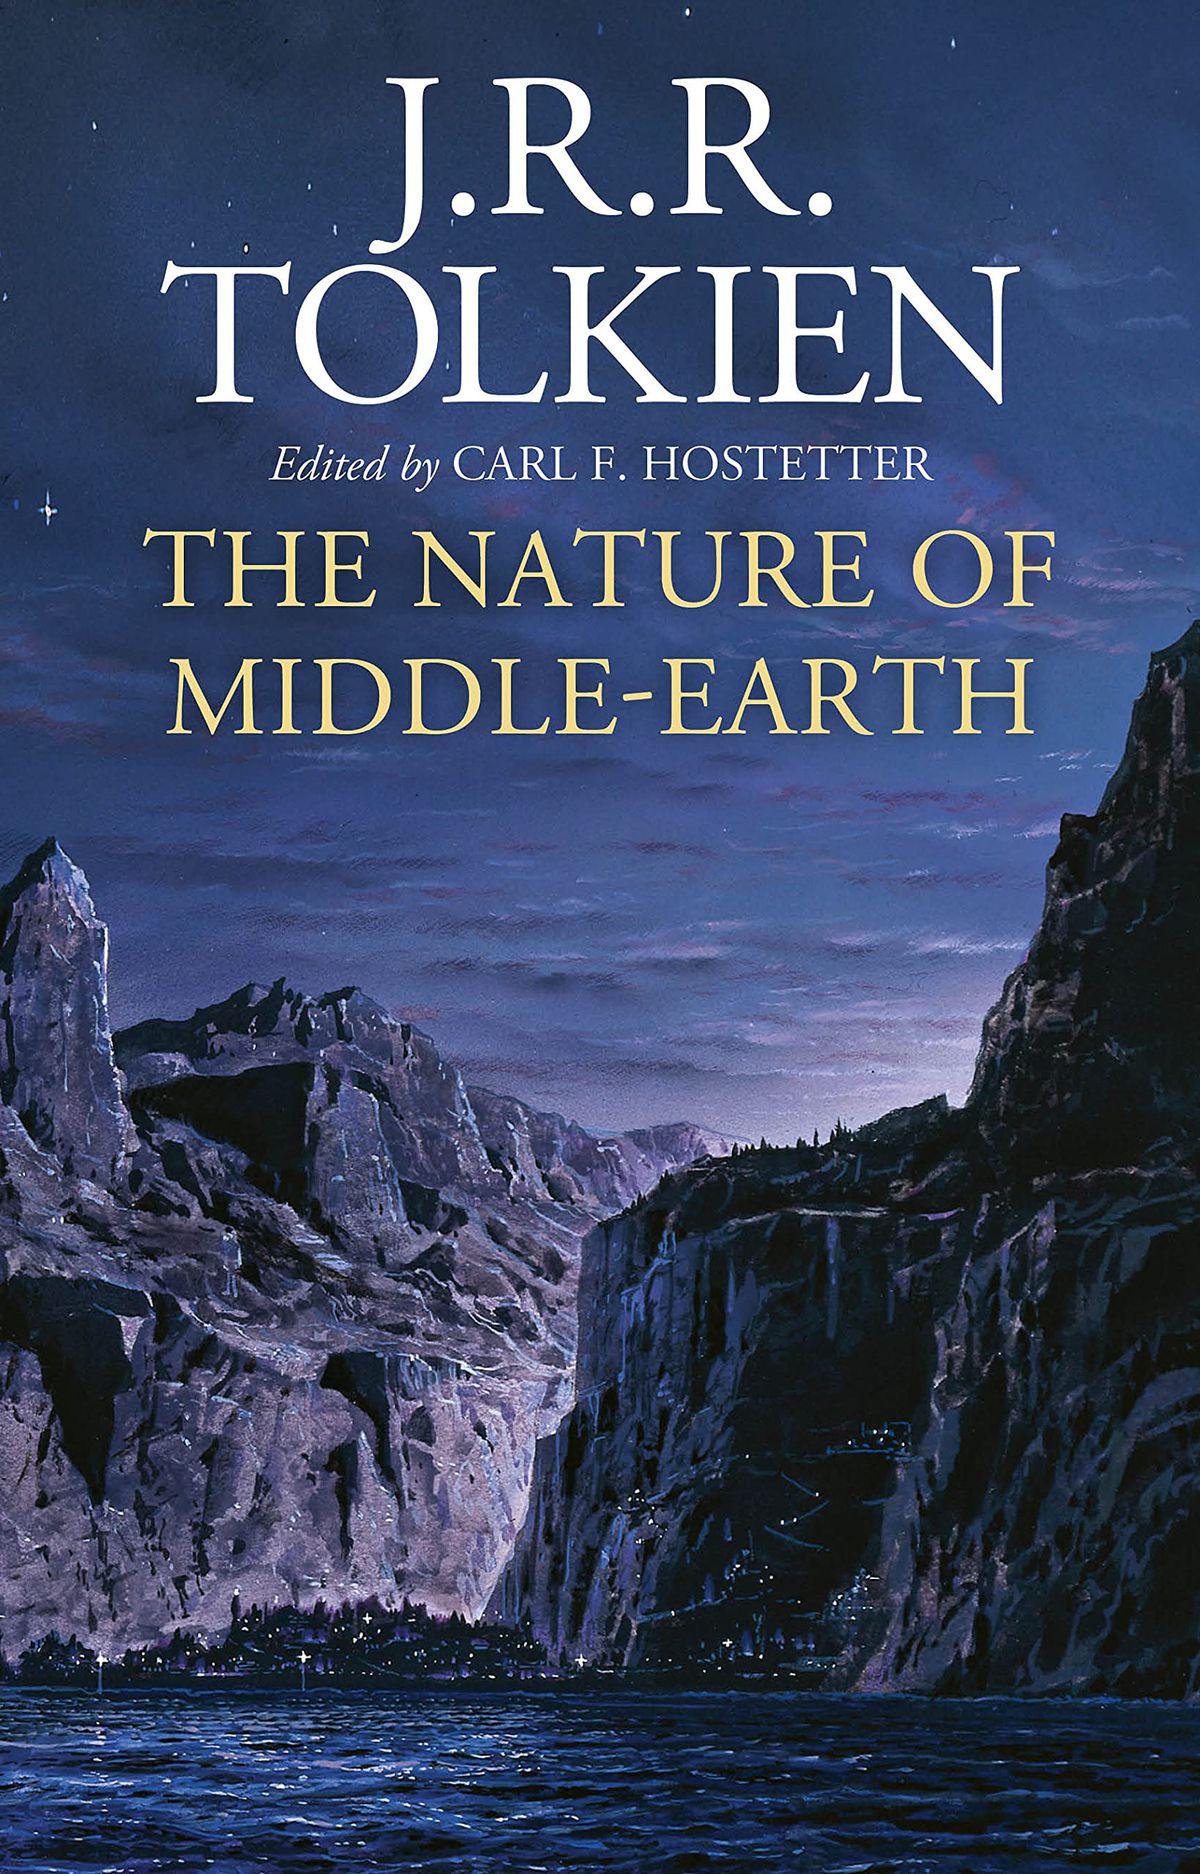 The Nature of Middle-earth by J.R.R. Tolkien  book cover